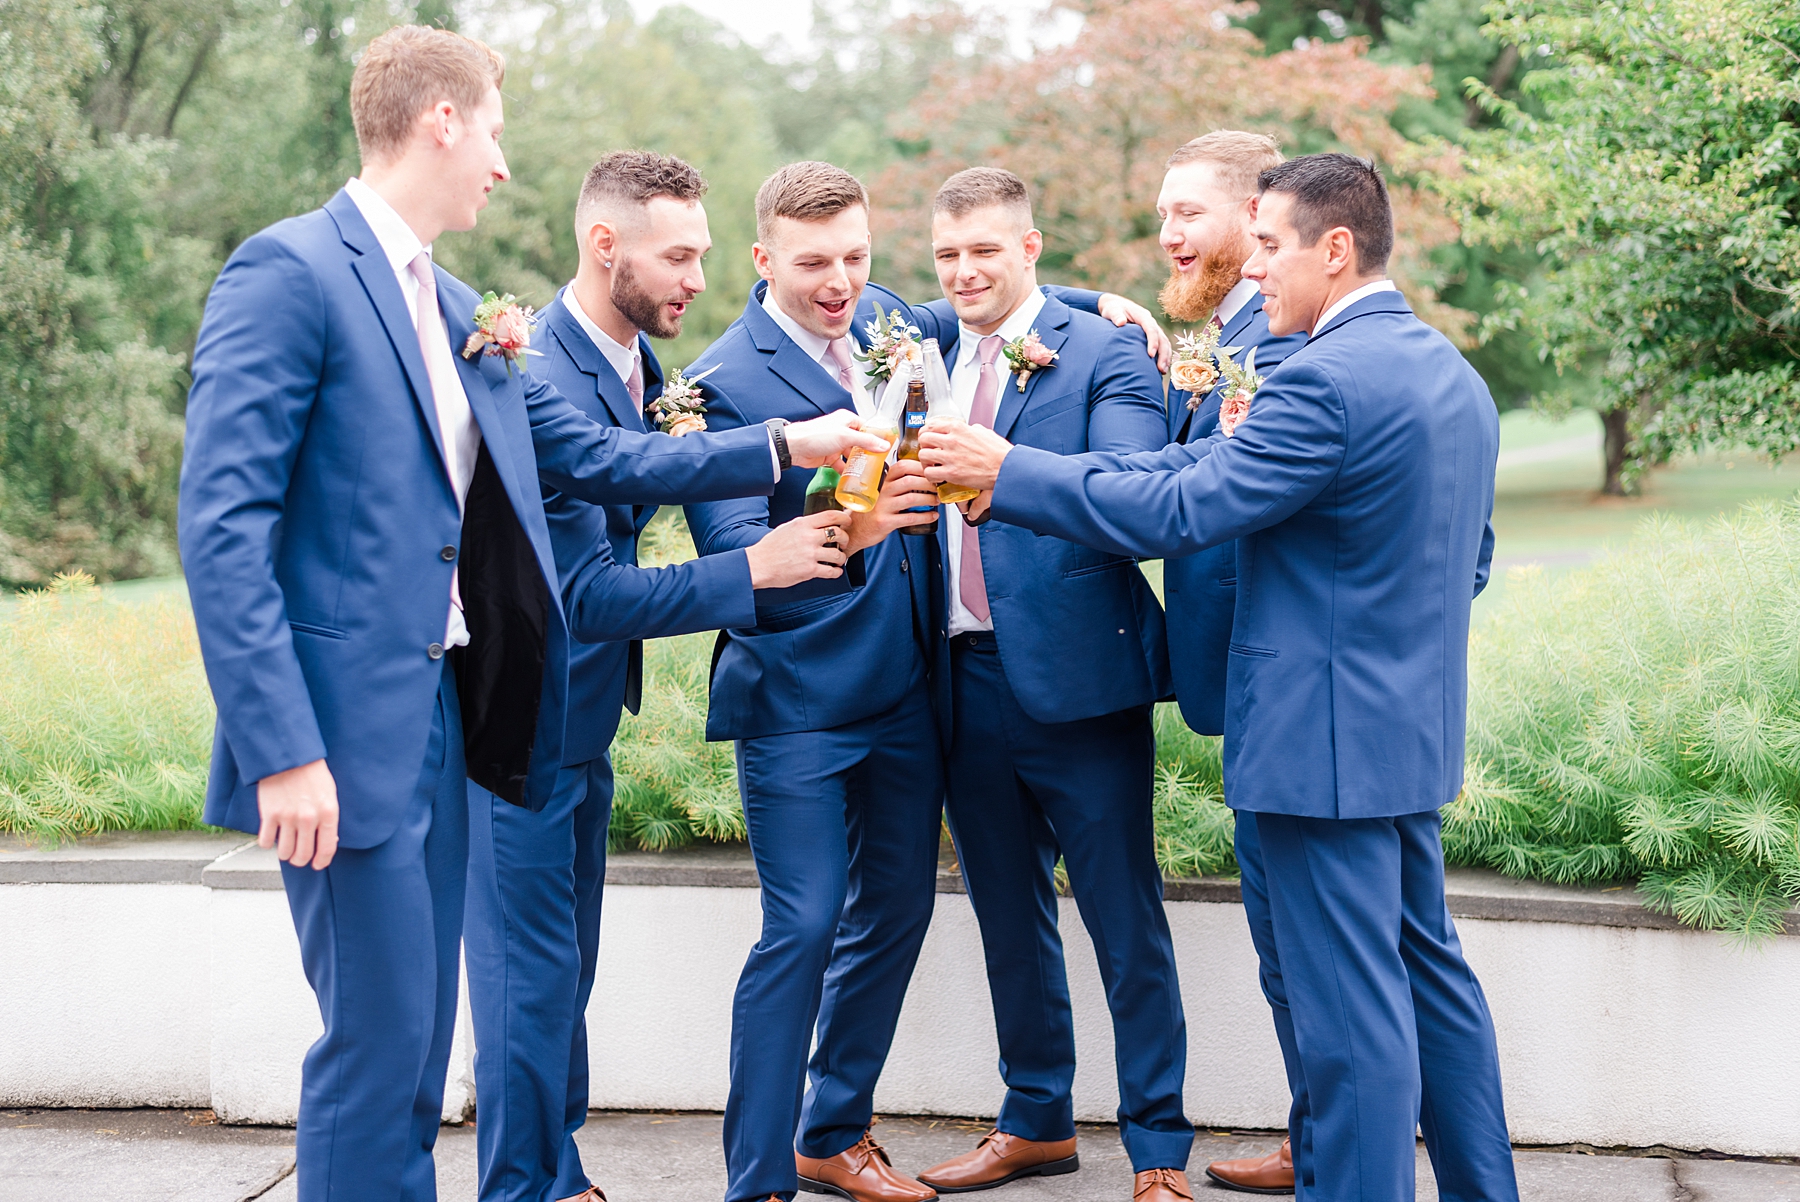 groom and groomsmen cheers together before ceremony